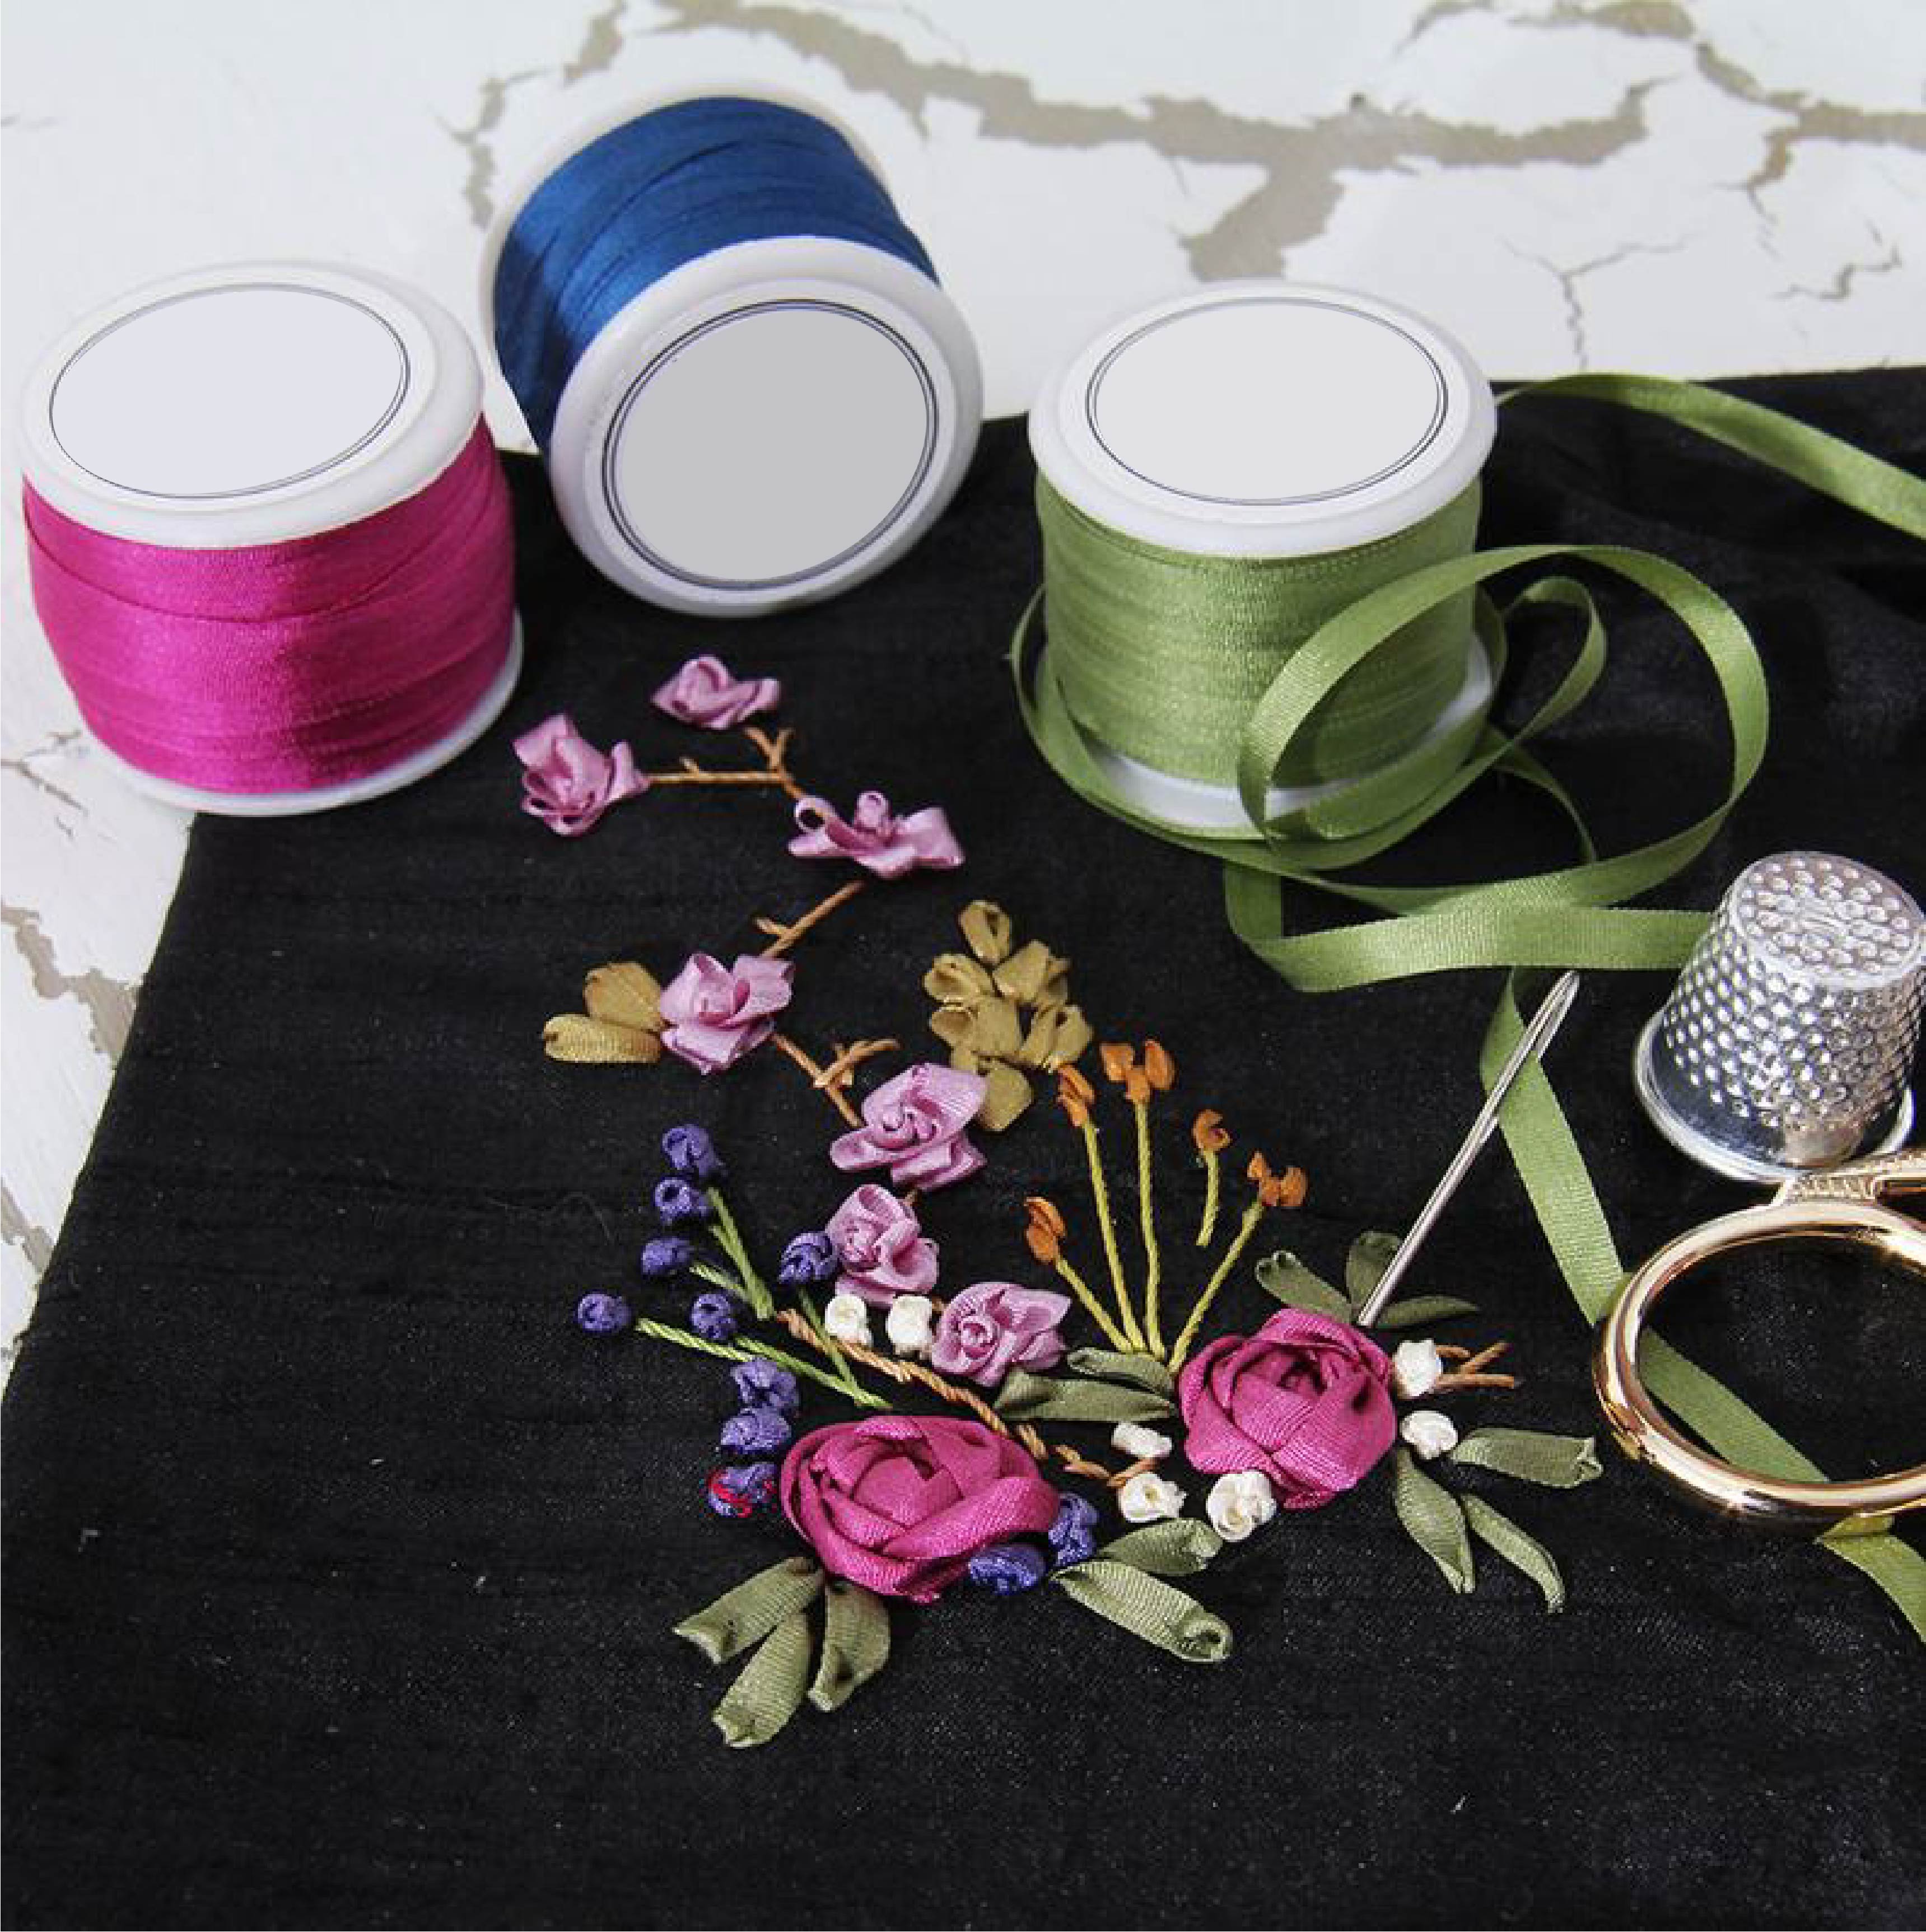 1/8"  Silk Ribbon, 4 Spool Collection (Red, Medium Blue, Dusty Rose & Lime Green), 10 Yards each